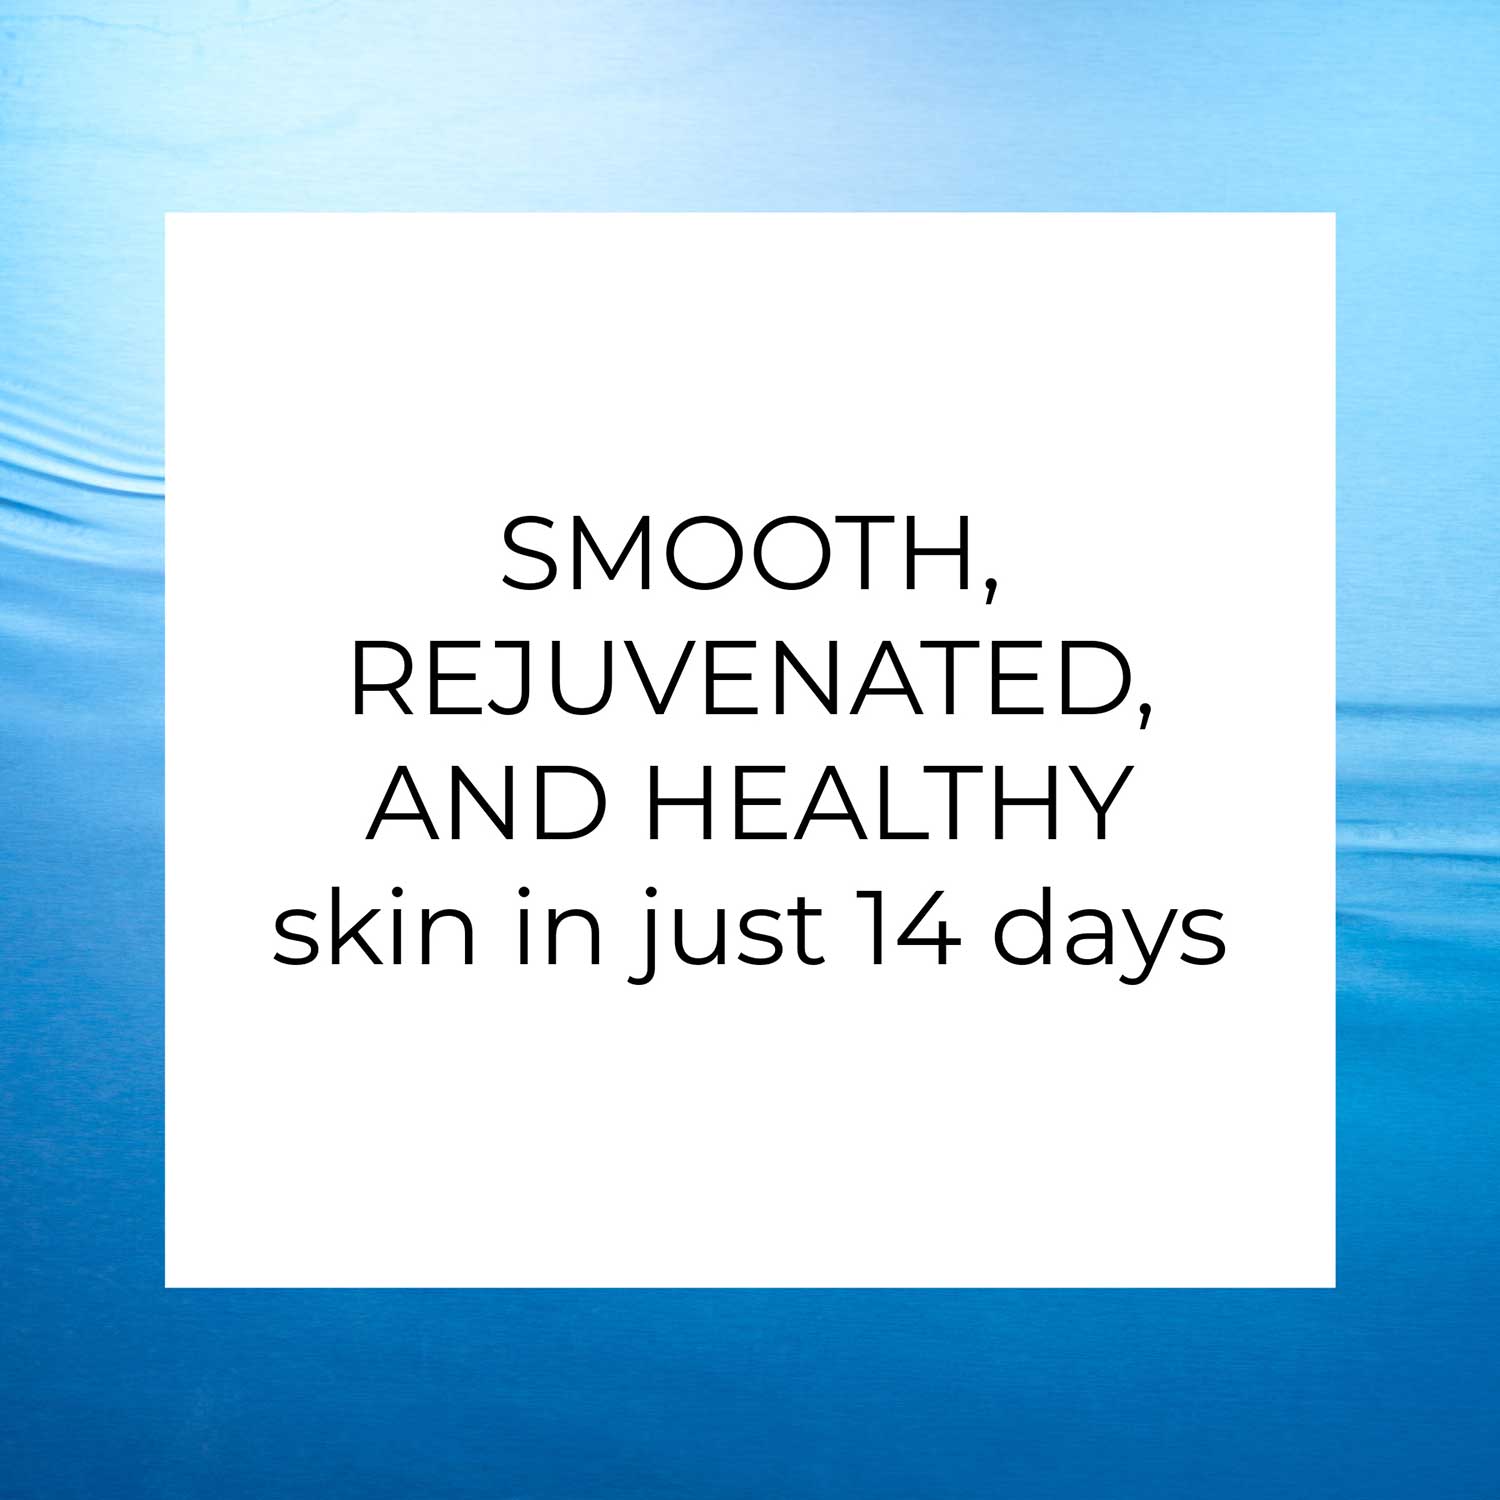 LightWater PM Replenishing Cream for smooth, rejuvenated, and healthy skin in just 14 days 